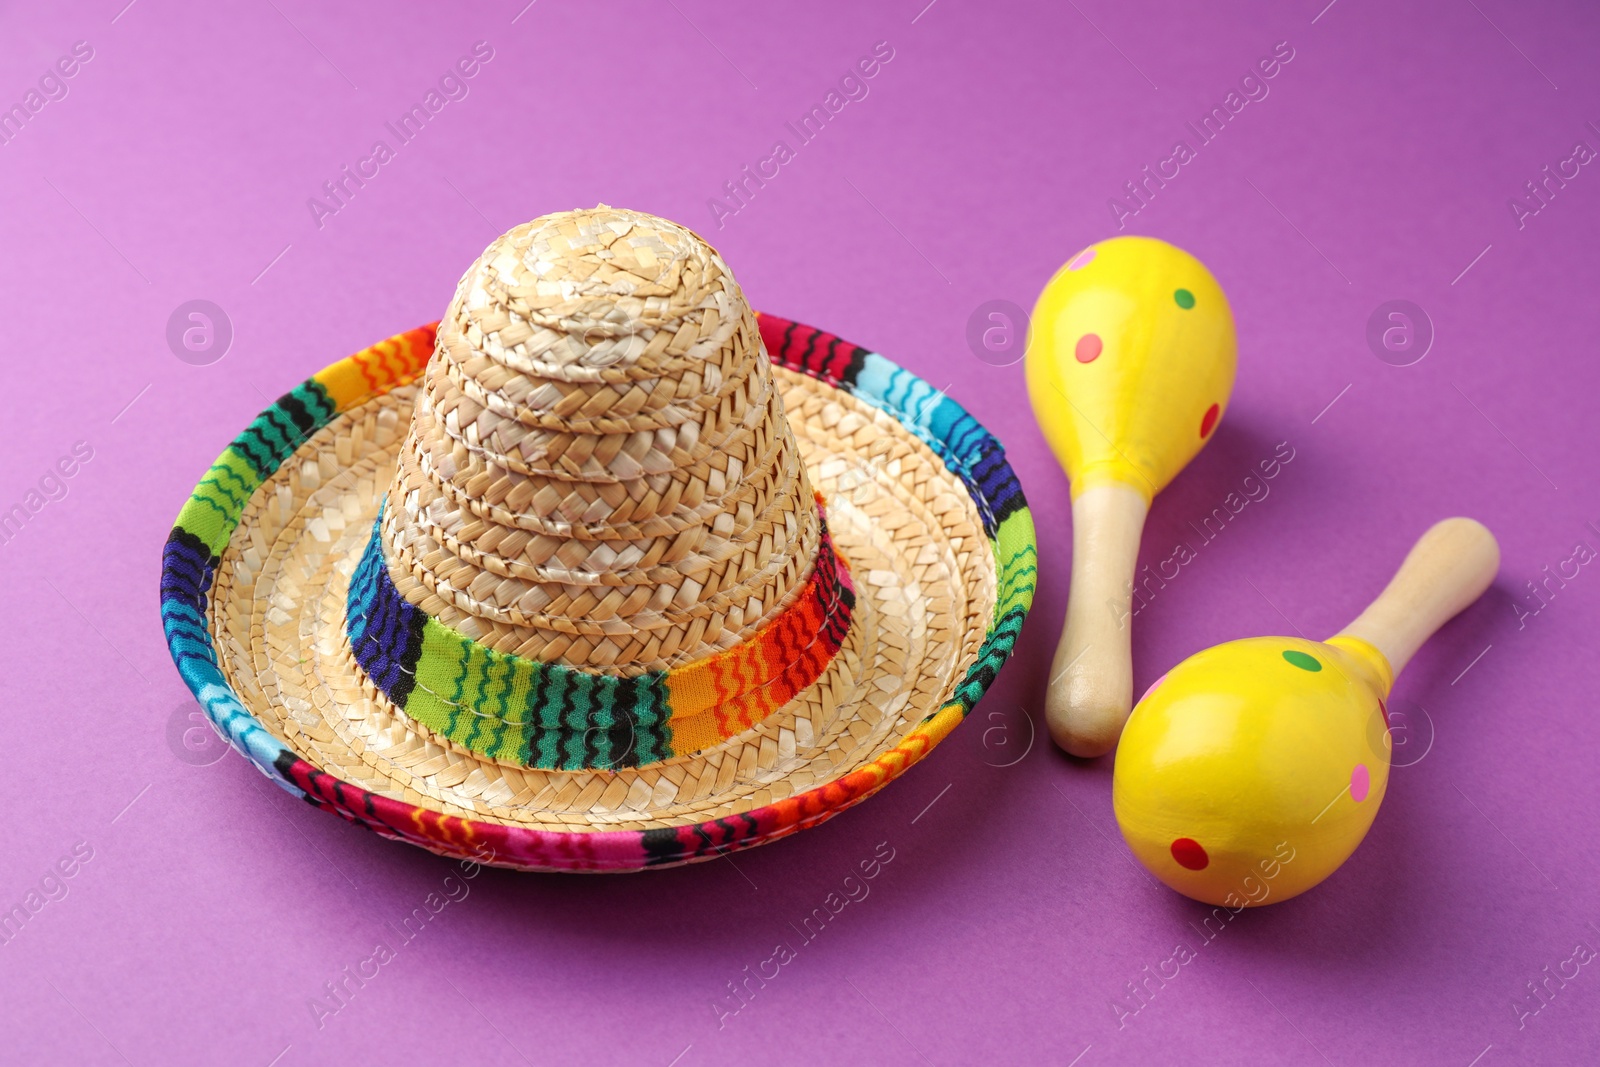 Photo of Mexican sombrero hat and maracas on purple background